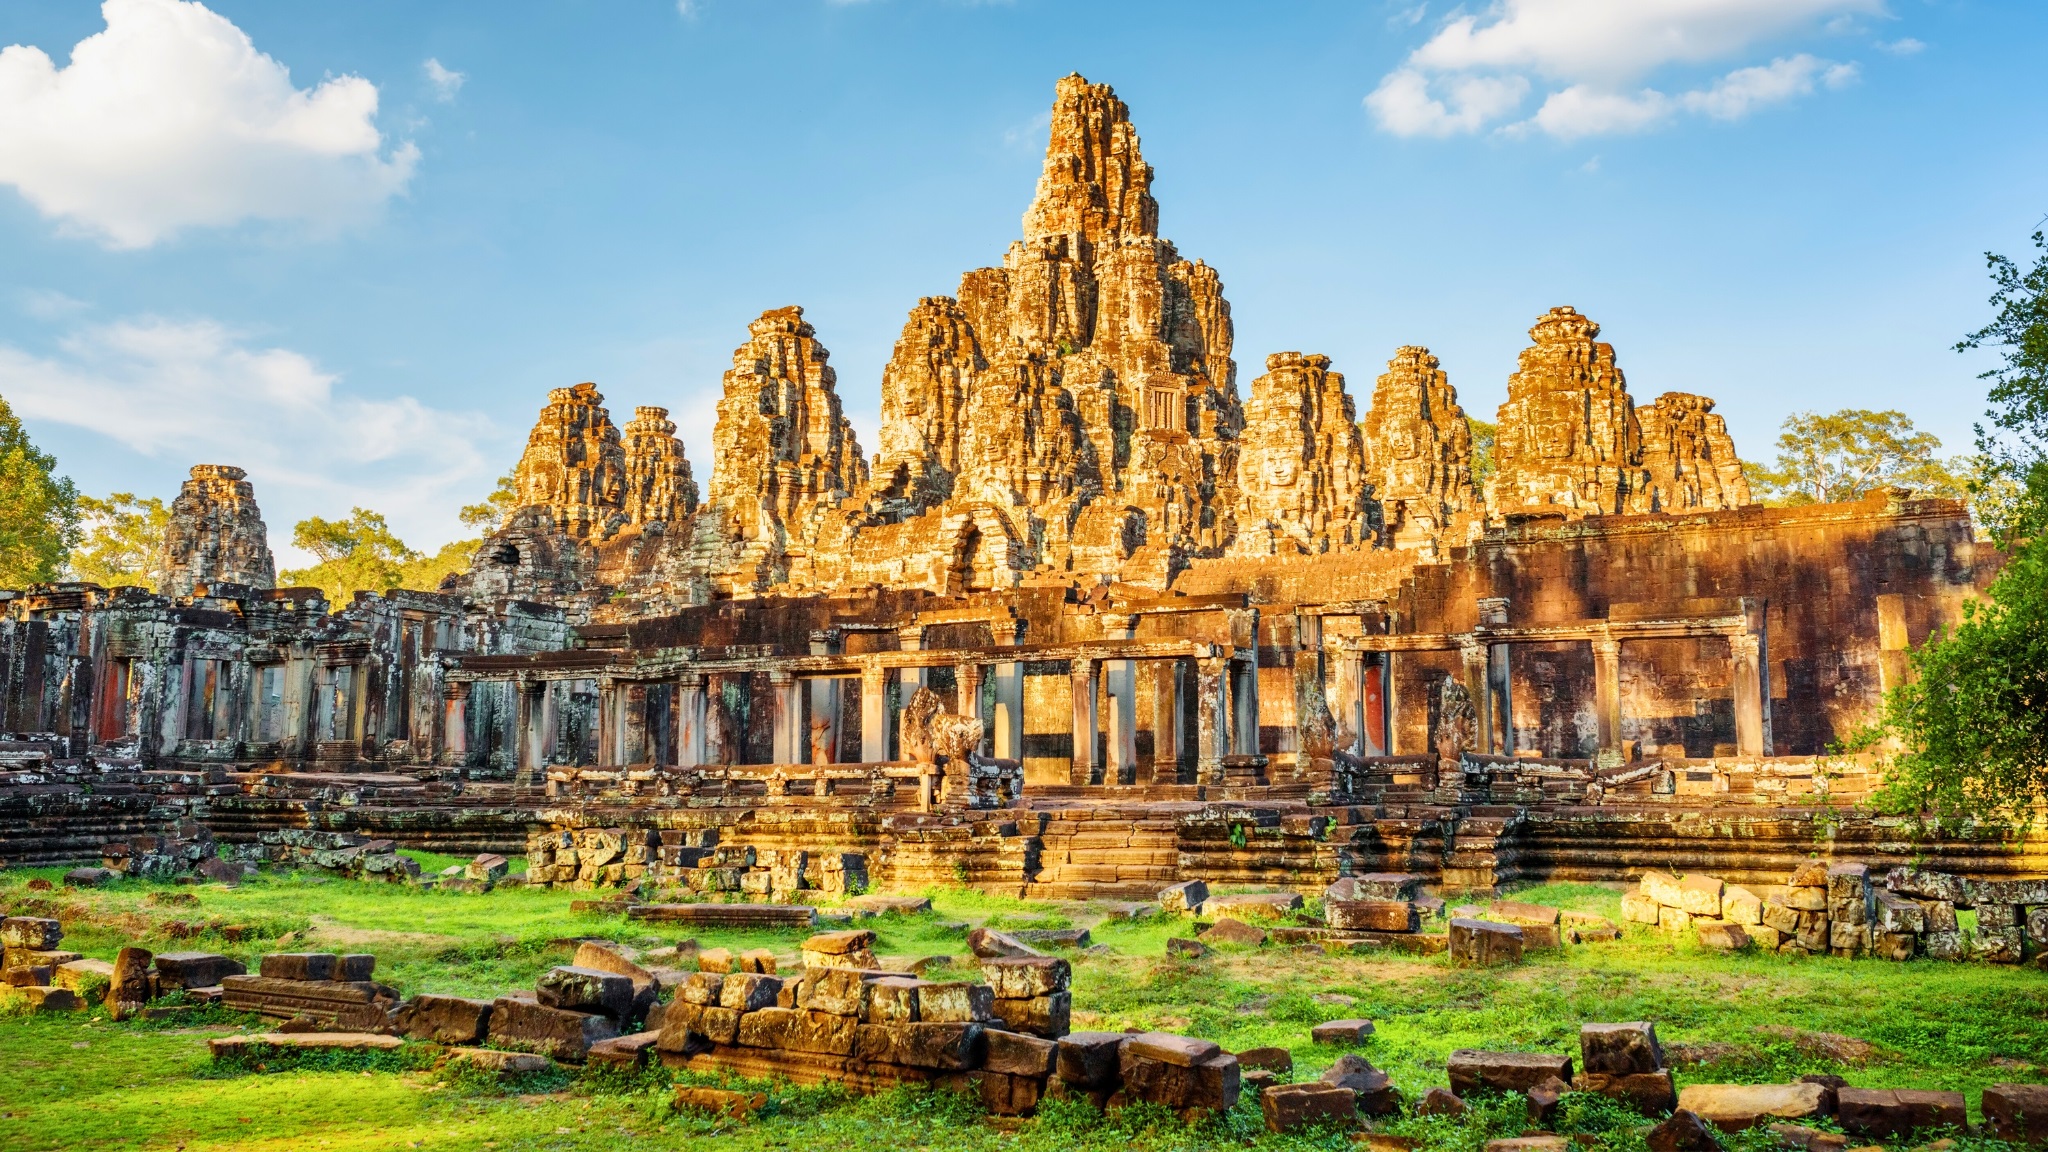 Explore The Temples Of Angkor